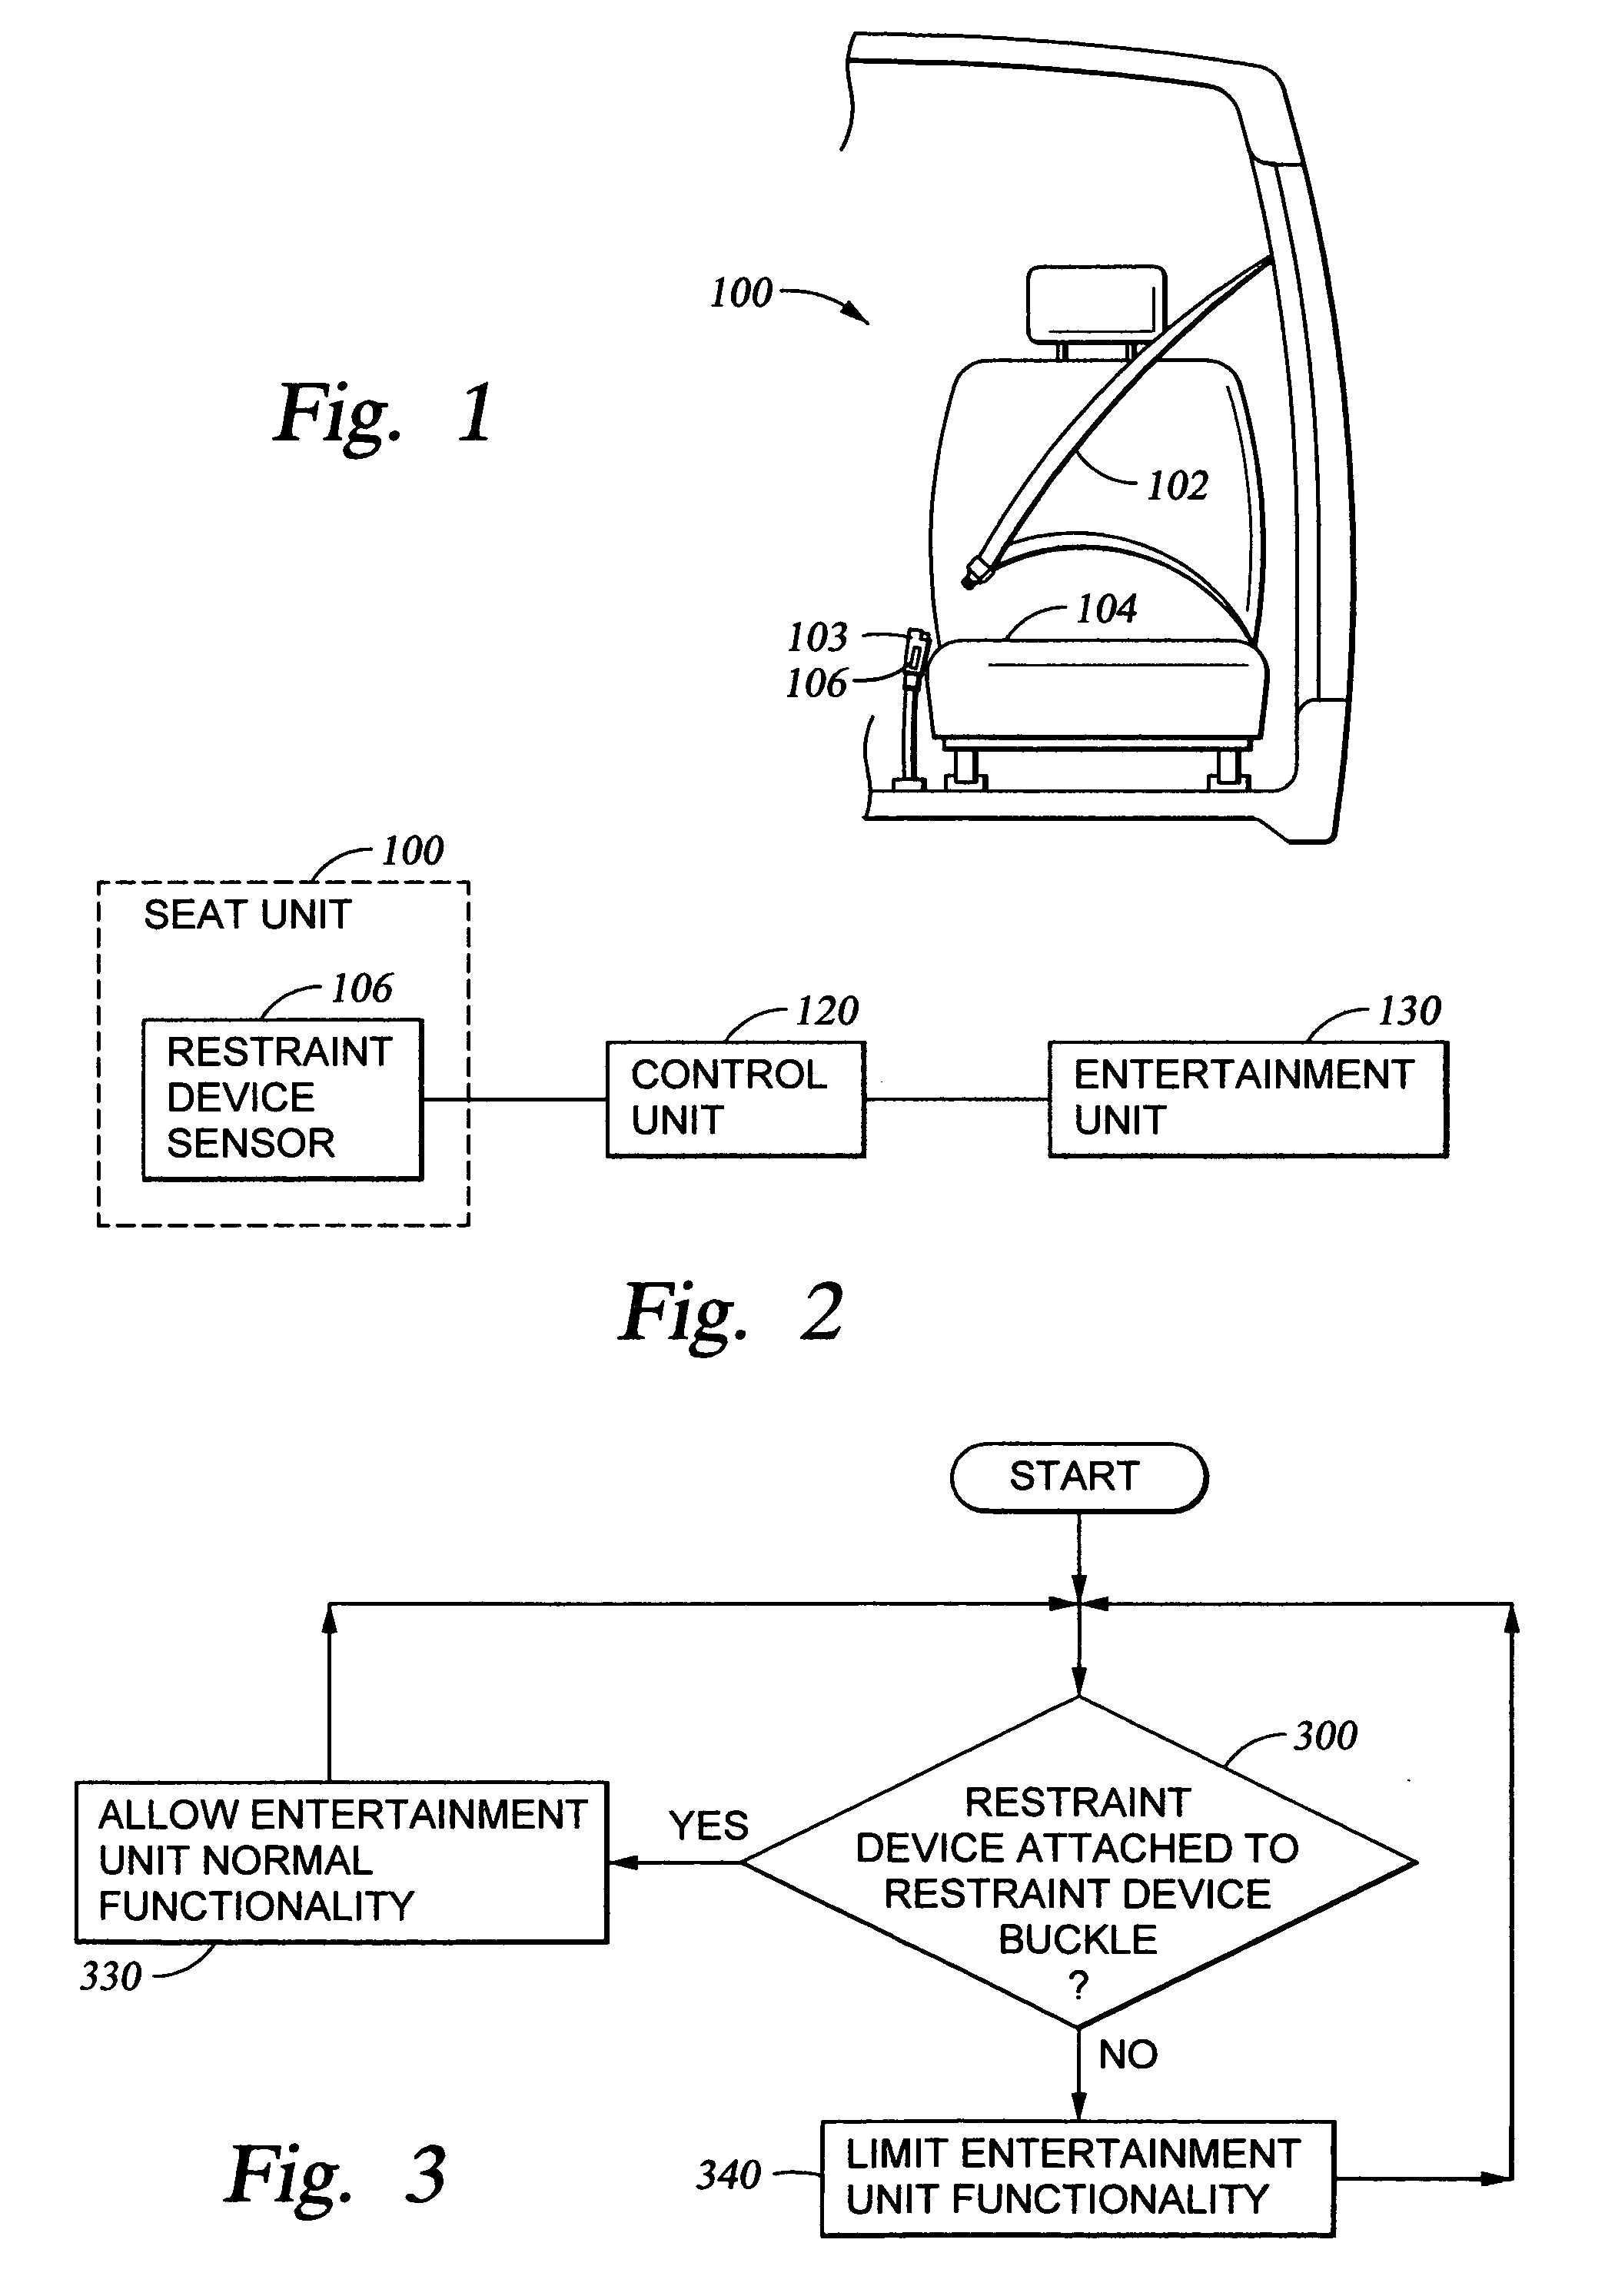 Apparatus and method to encourage seat belt use